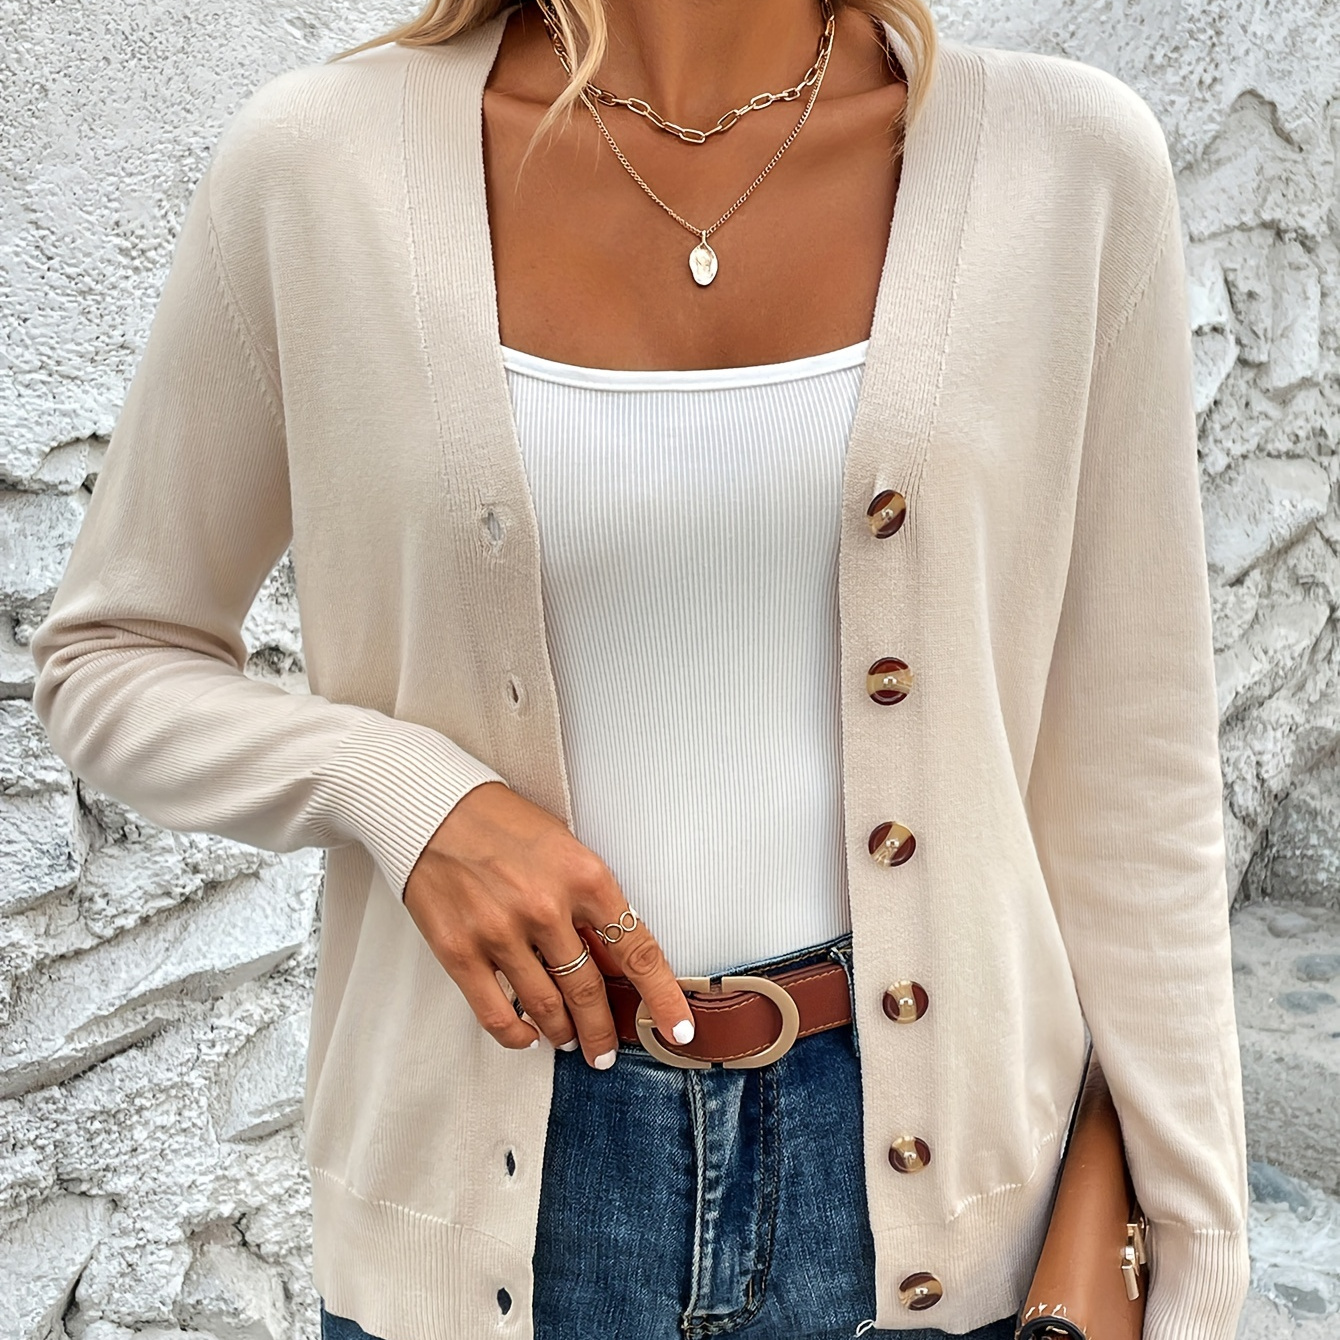 

Solid Color Button Front Top, Elegant V Neck Long Sleeve Cardigans Top For Every Day, Women's Clothing